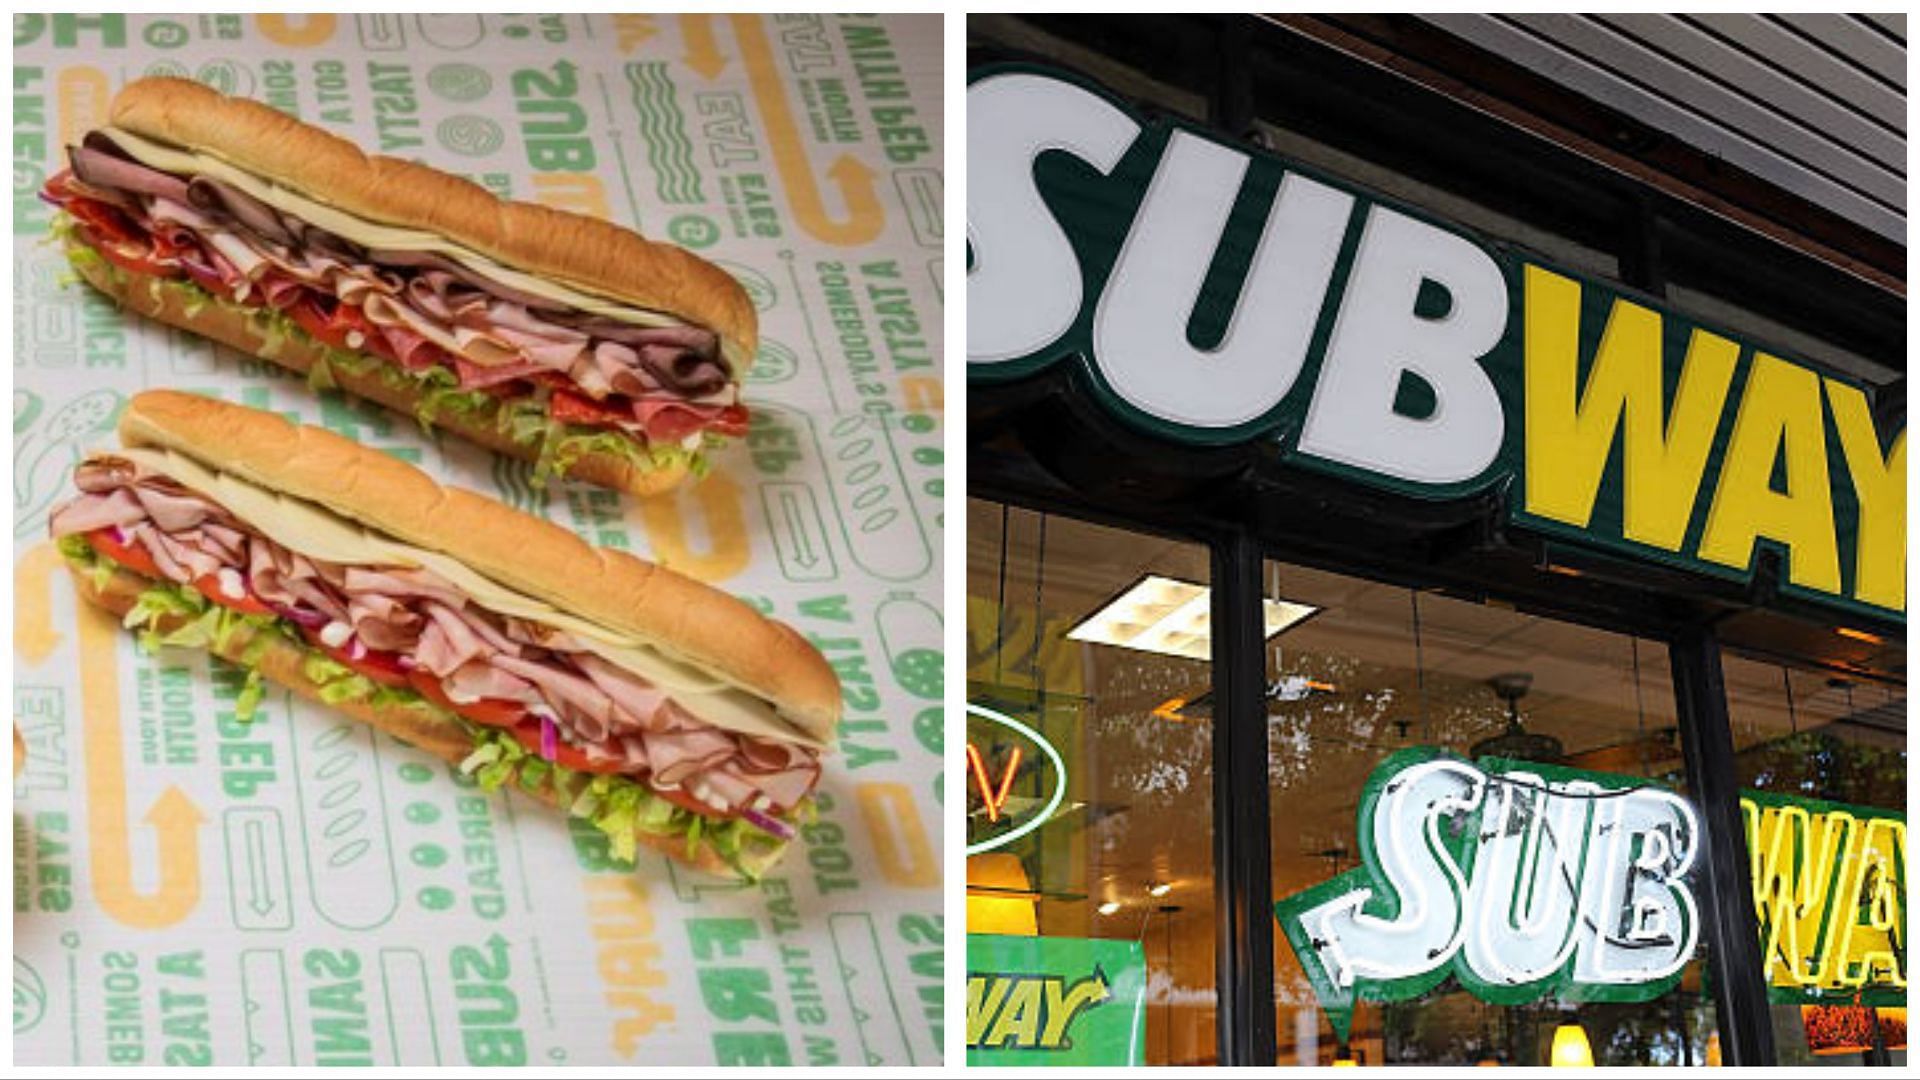 Subway says 10K fans offered to change their names to 'Subway' to win free  subs for life